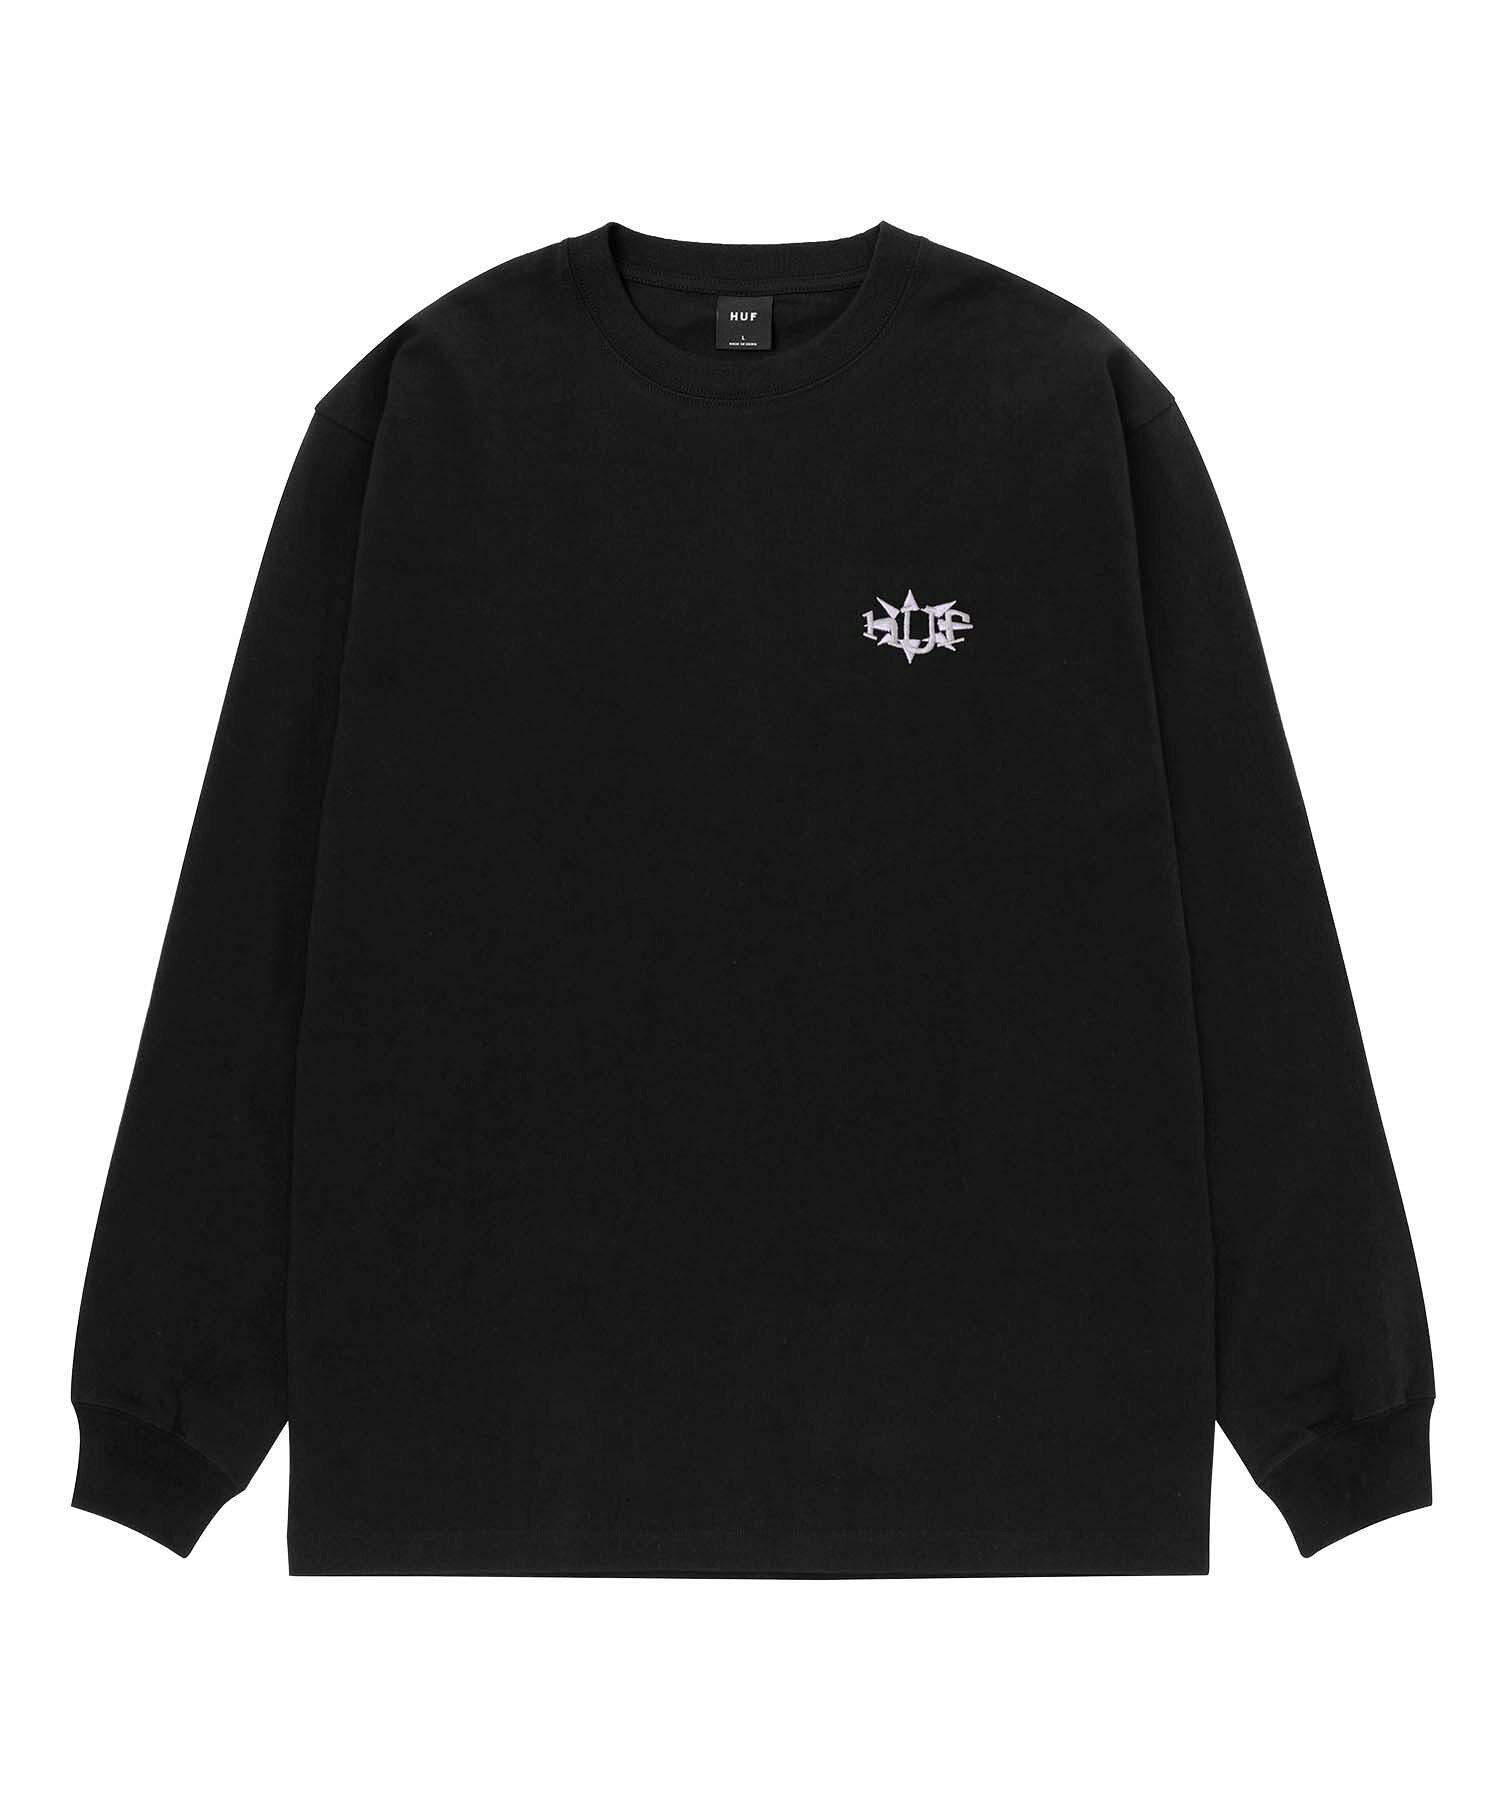 JAZZY GROOVES L/S EMB TEE HUF ハフ ロンT